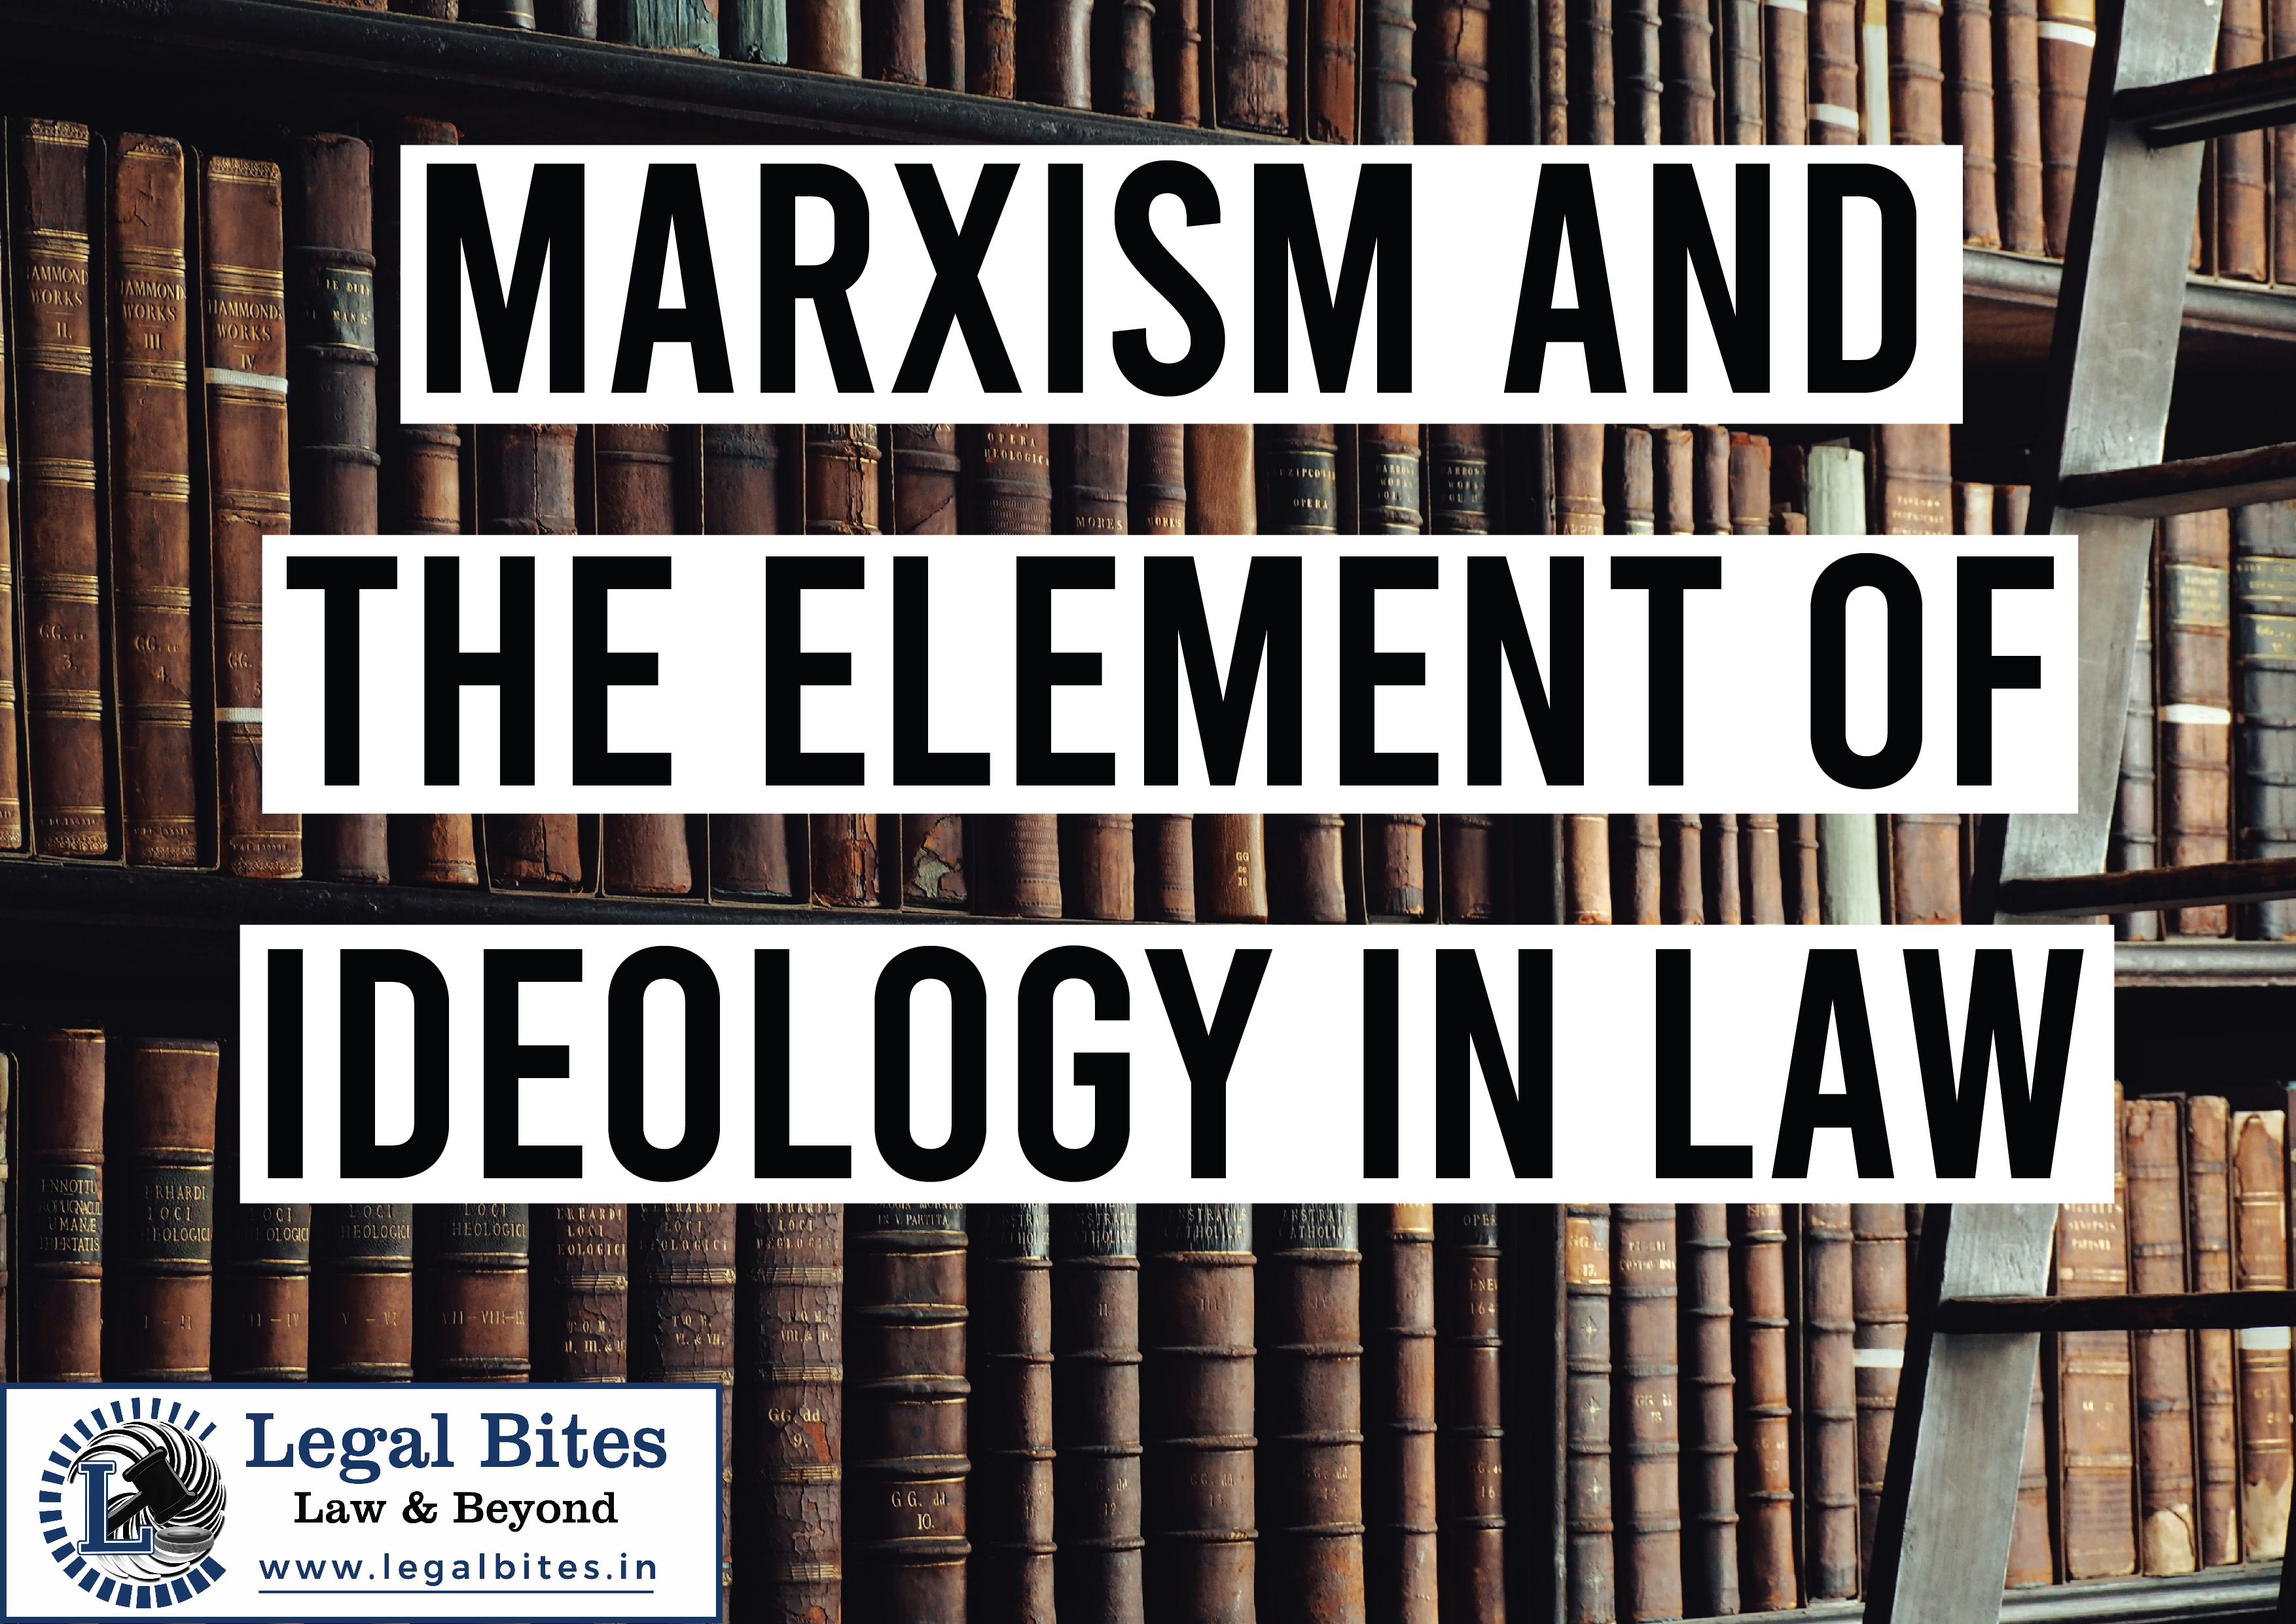 Marxism and the Element of Ideology in Law